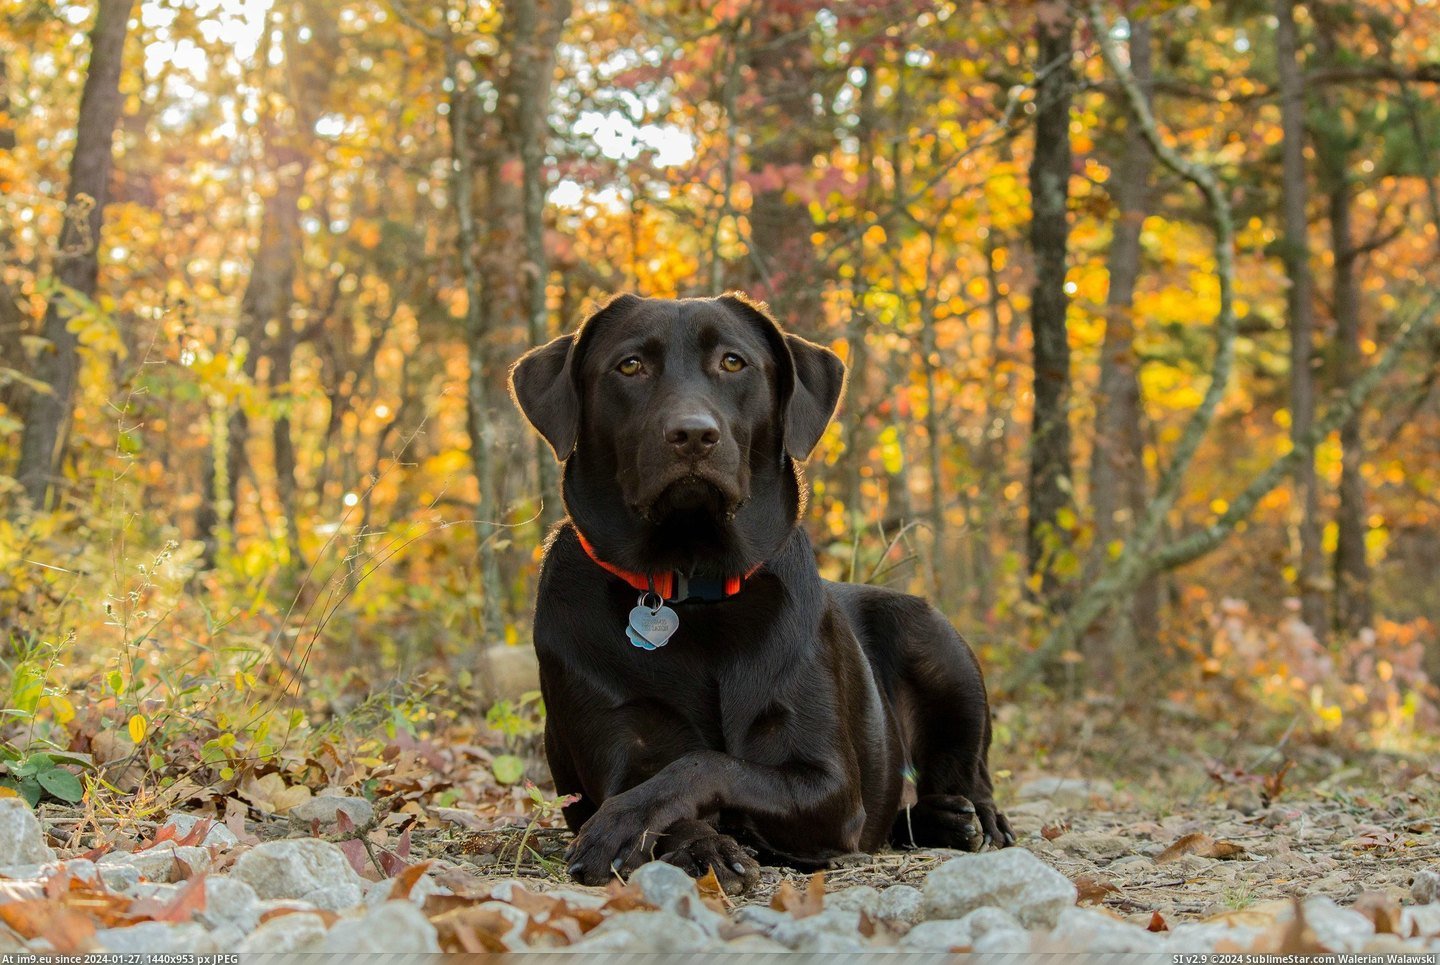 #Fuck #Dog #Majestic #Fall #Colors [Aww] Fall colors and my dog...Majestic as fuck Pic. (Изображение из альбом My r/AWW favs))